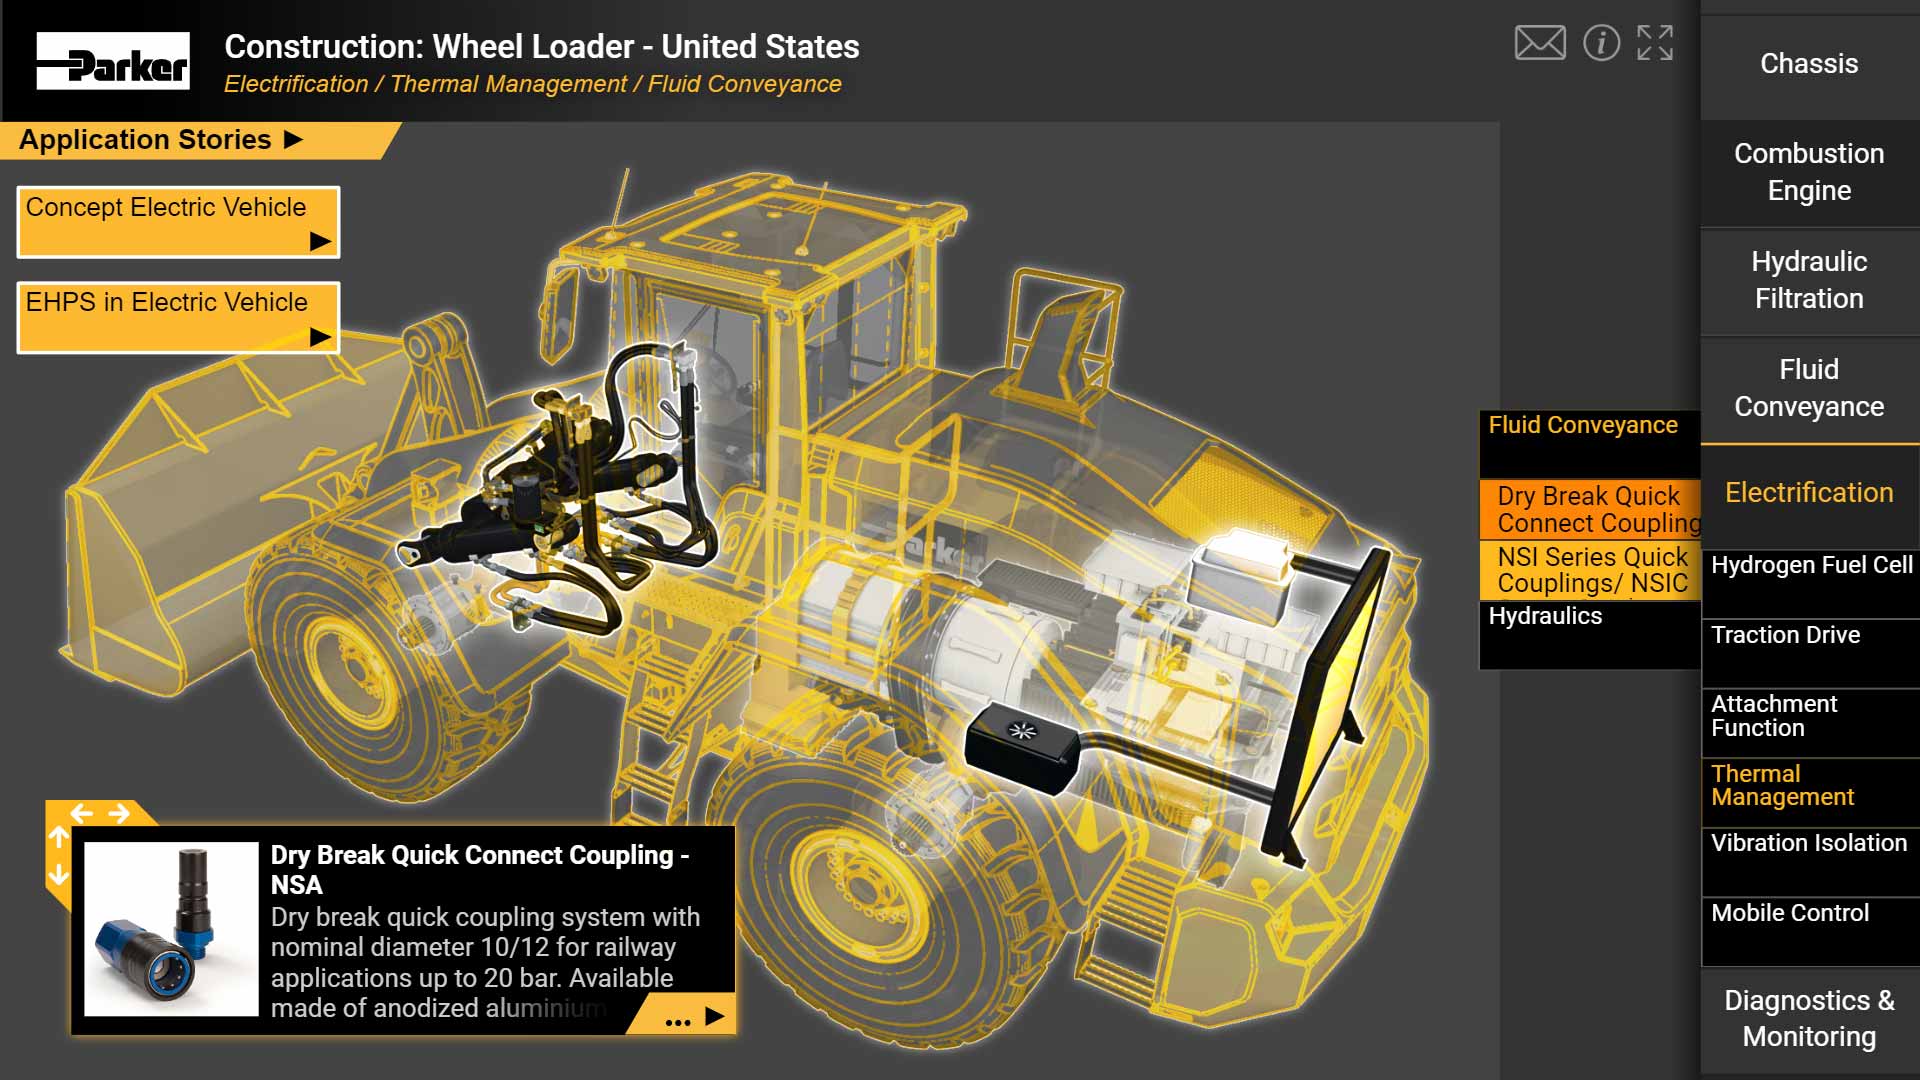 Asia Pacific Off Road Machinery - Wheel Loader Equipment and Products Industrial OEM Equipment Manufacturer